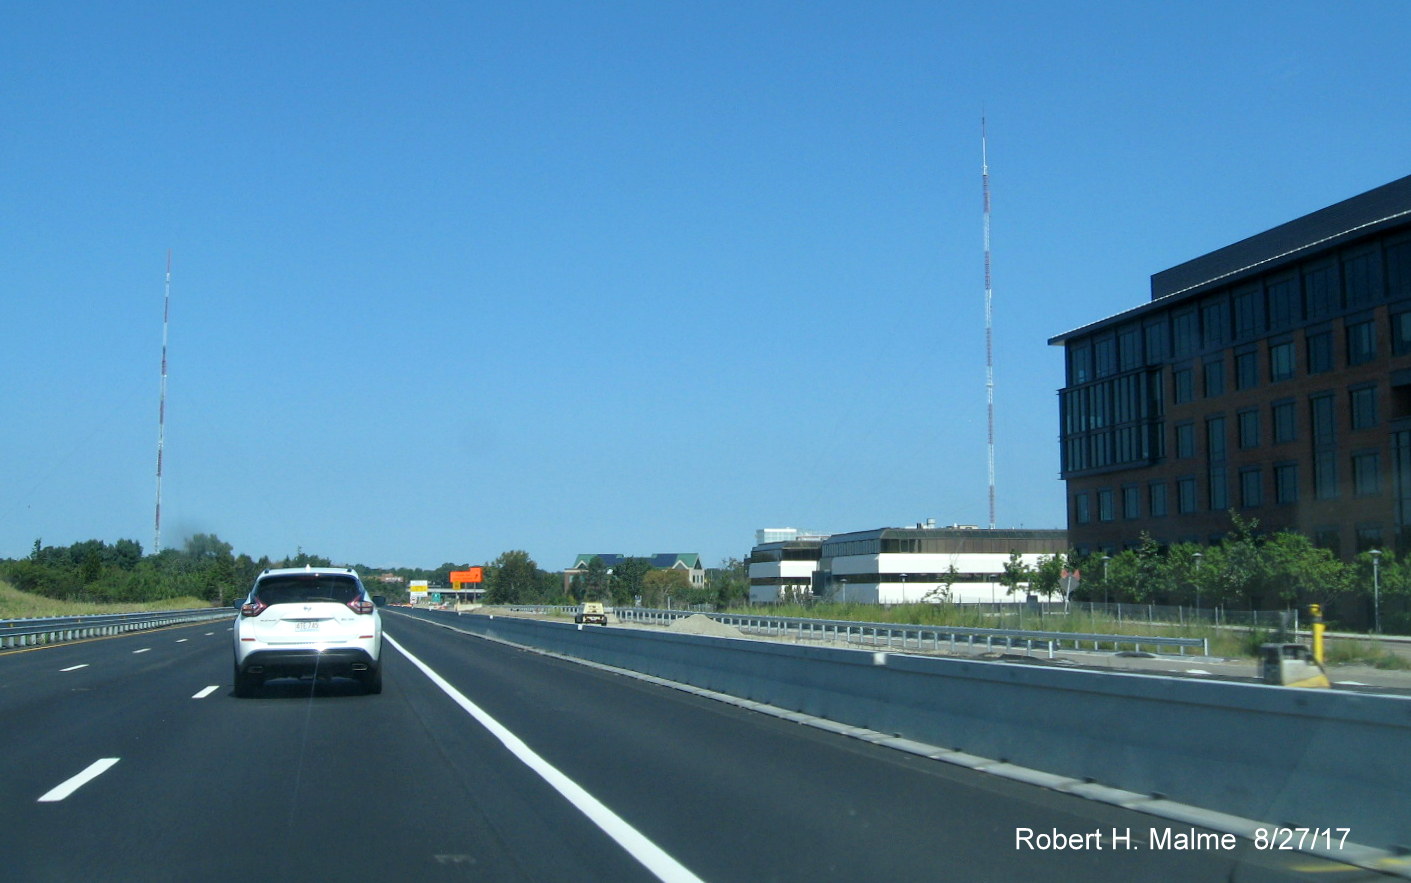 Image taken of newly paved I-95 North roadway approaching Highland Ave exit in Needham